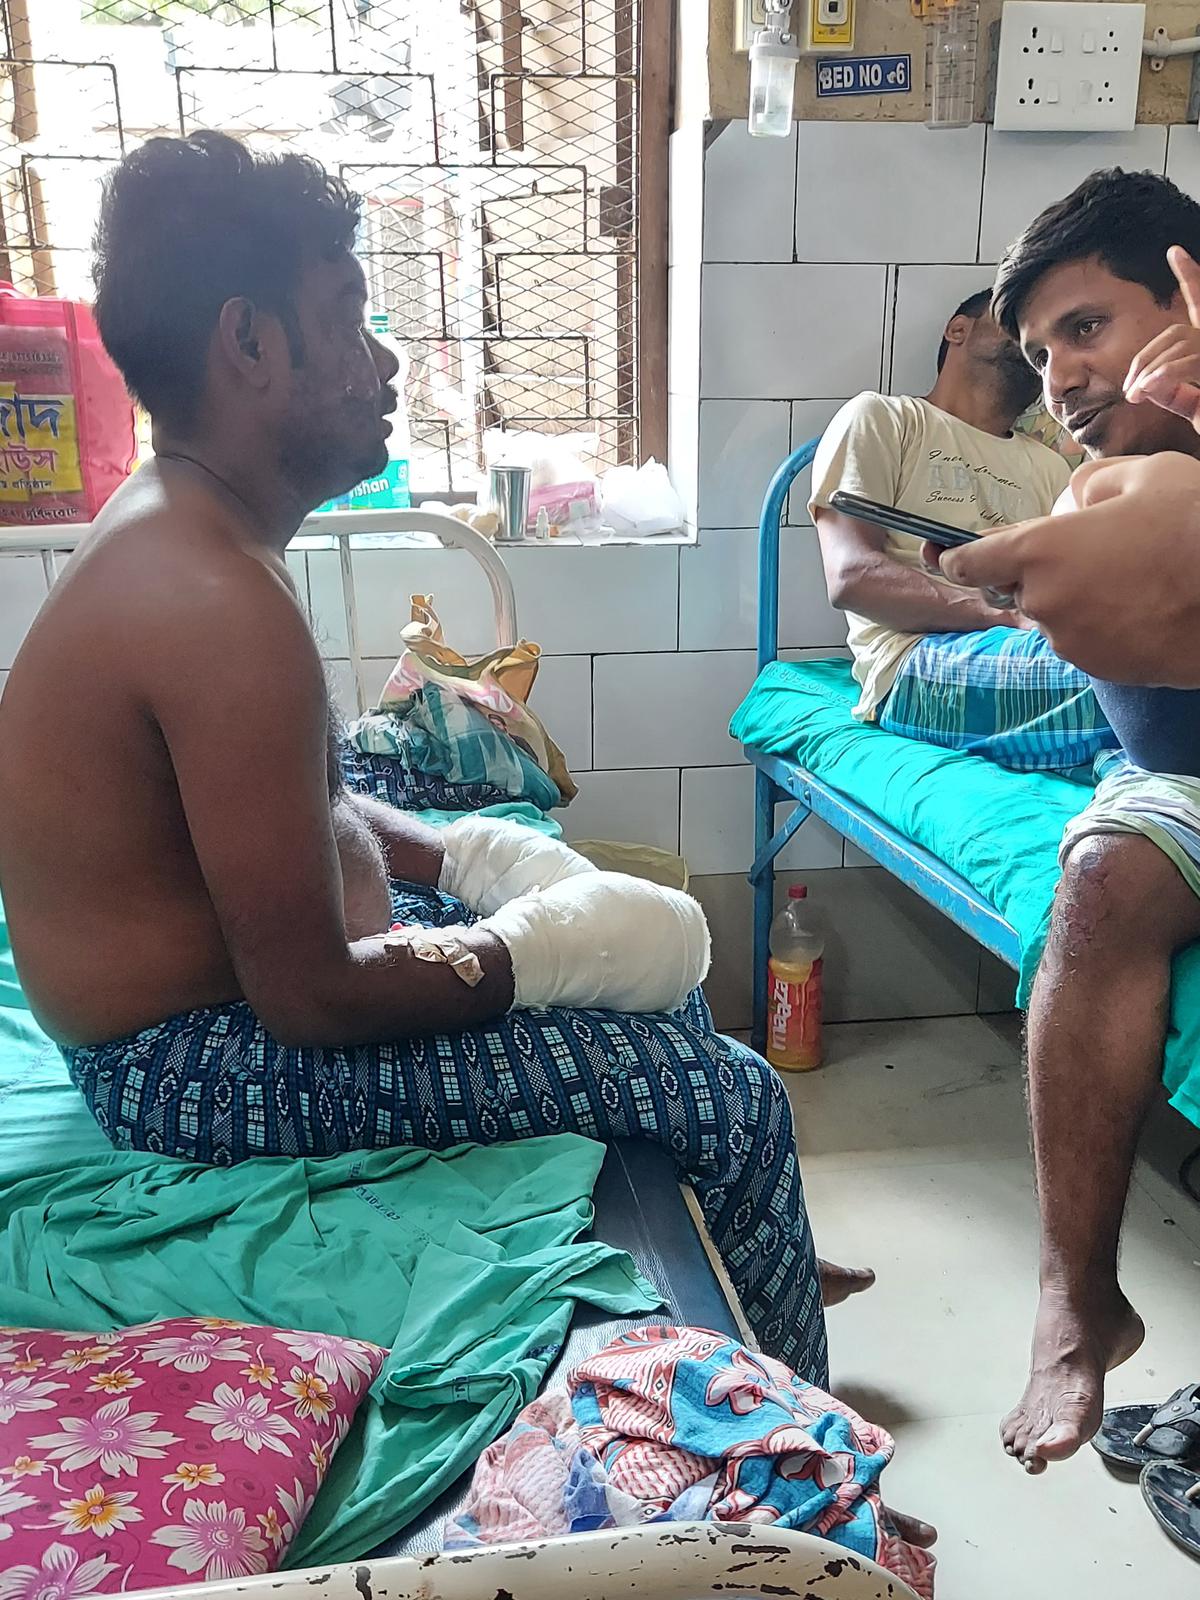 Abdul Lateef, from Farraka, at Murshidabad Medical College and Hospital. Lateef sustained injuries on his face and hands in a crude bomb explosion.